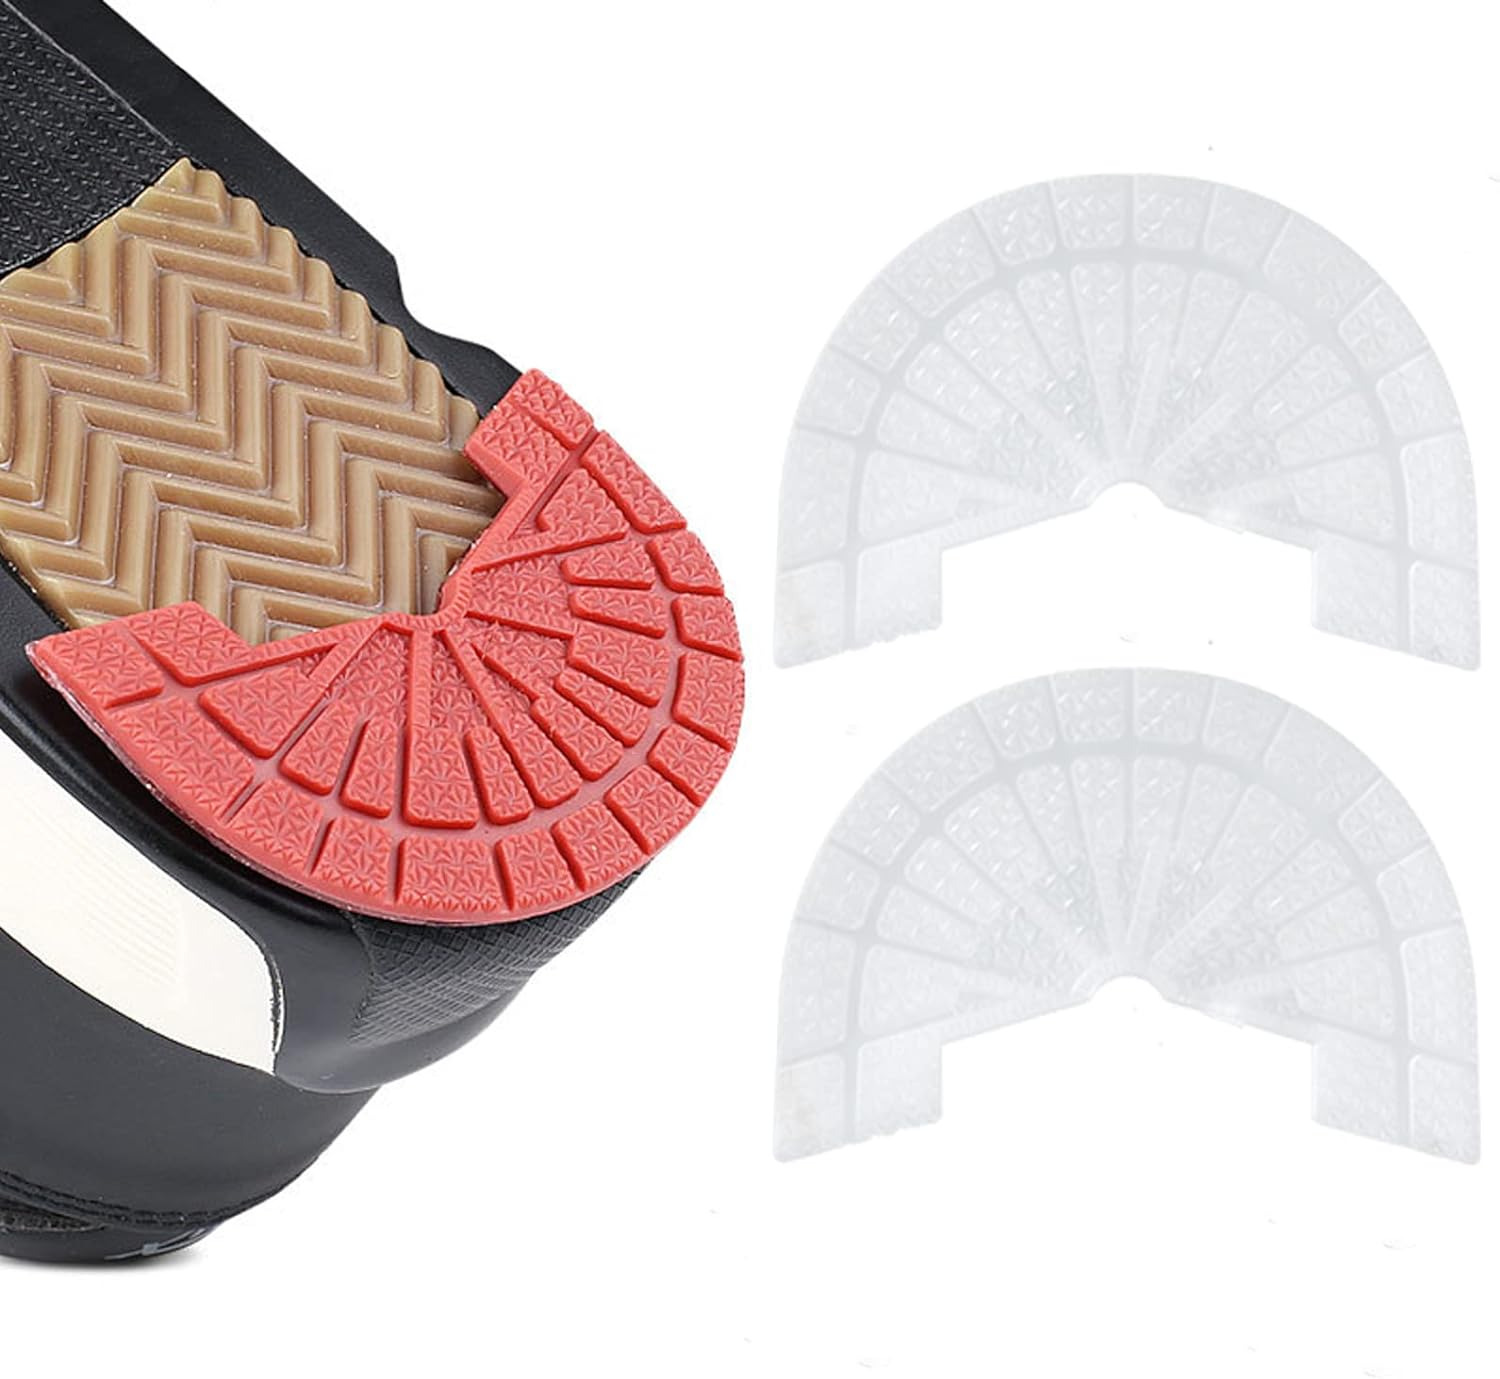 Beautiful Sole Protector for Sneakers, Shoe Heel Protector Strong Self-Adhesive Repair Pla on eBay